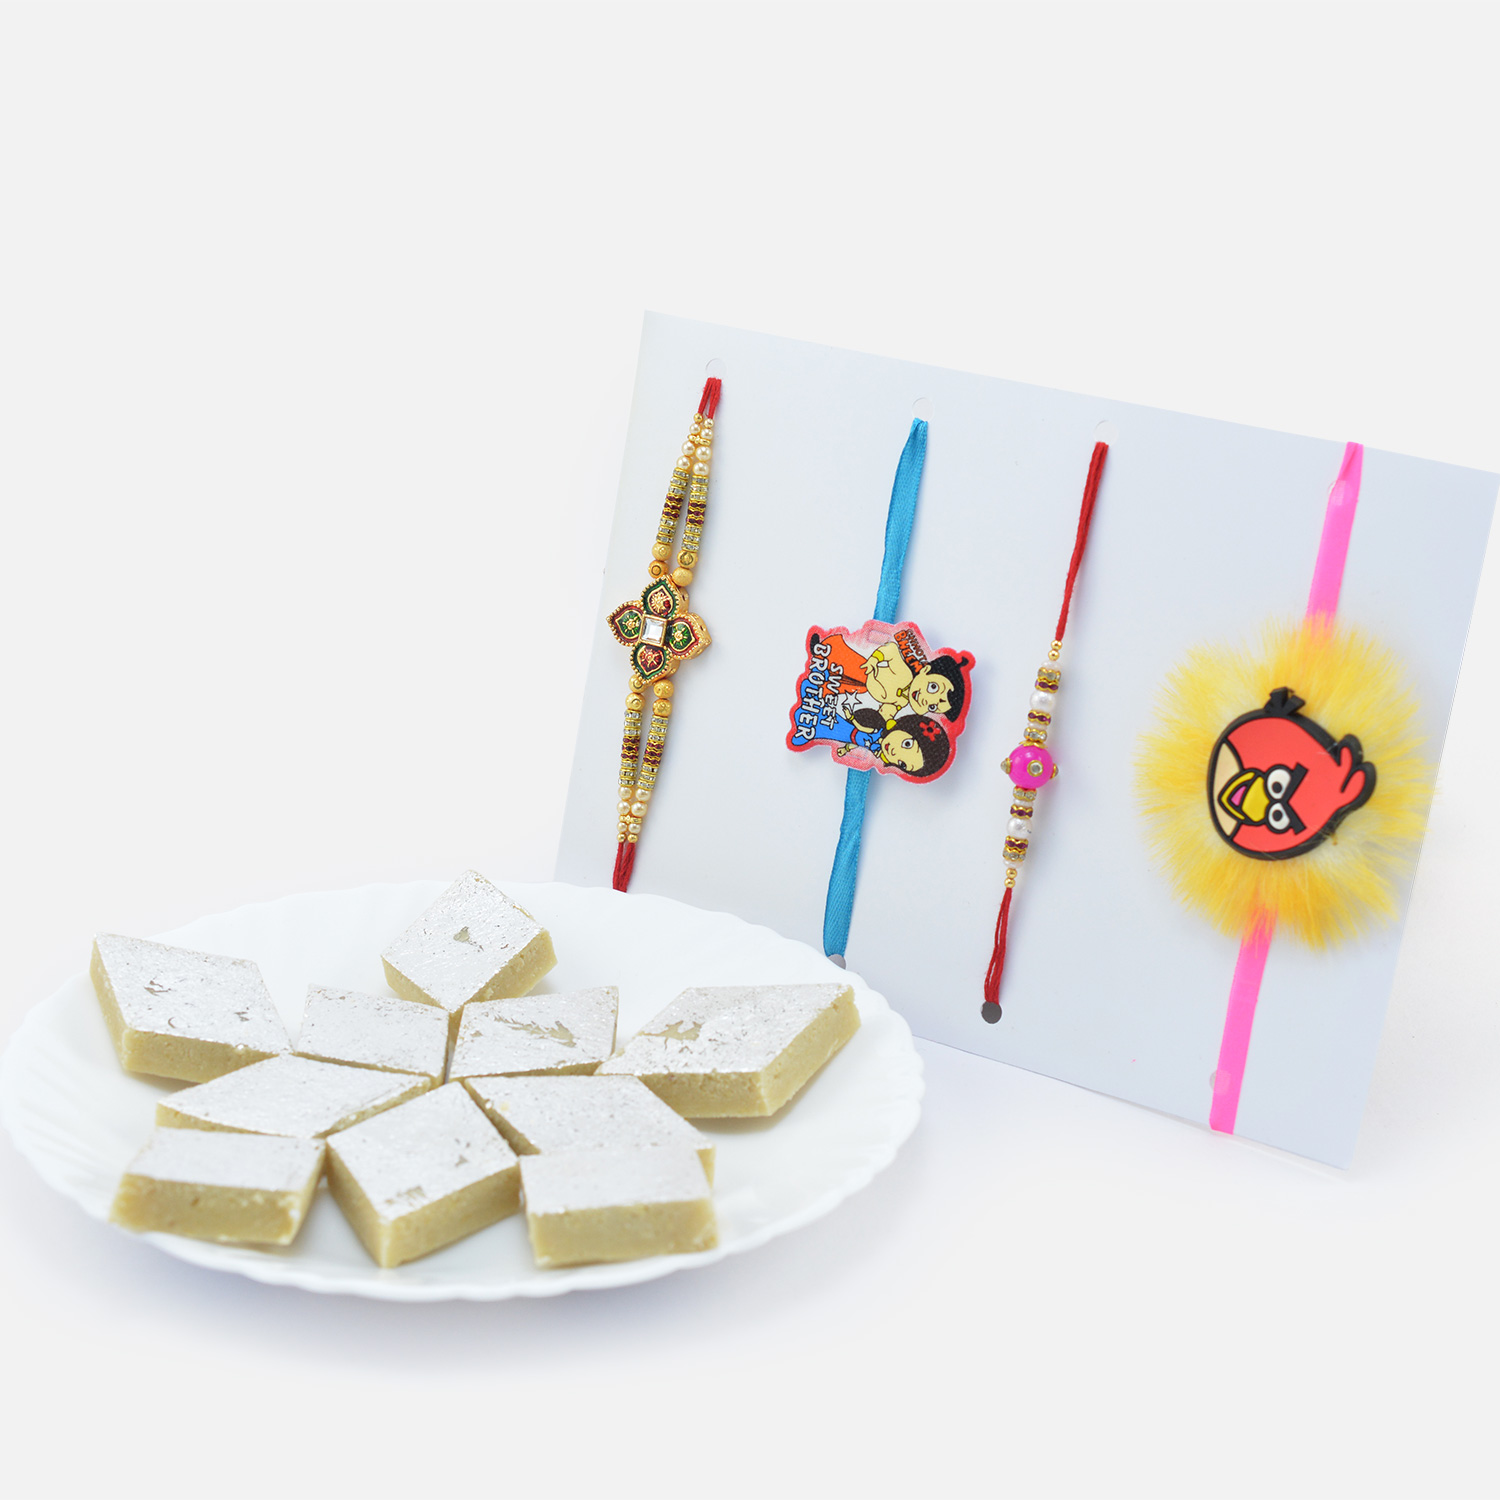 Amazing Looking 2 Rakhis for Brother and 2 For Kids with Mouth Watering Sweet of Kaju Katli